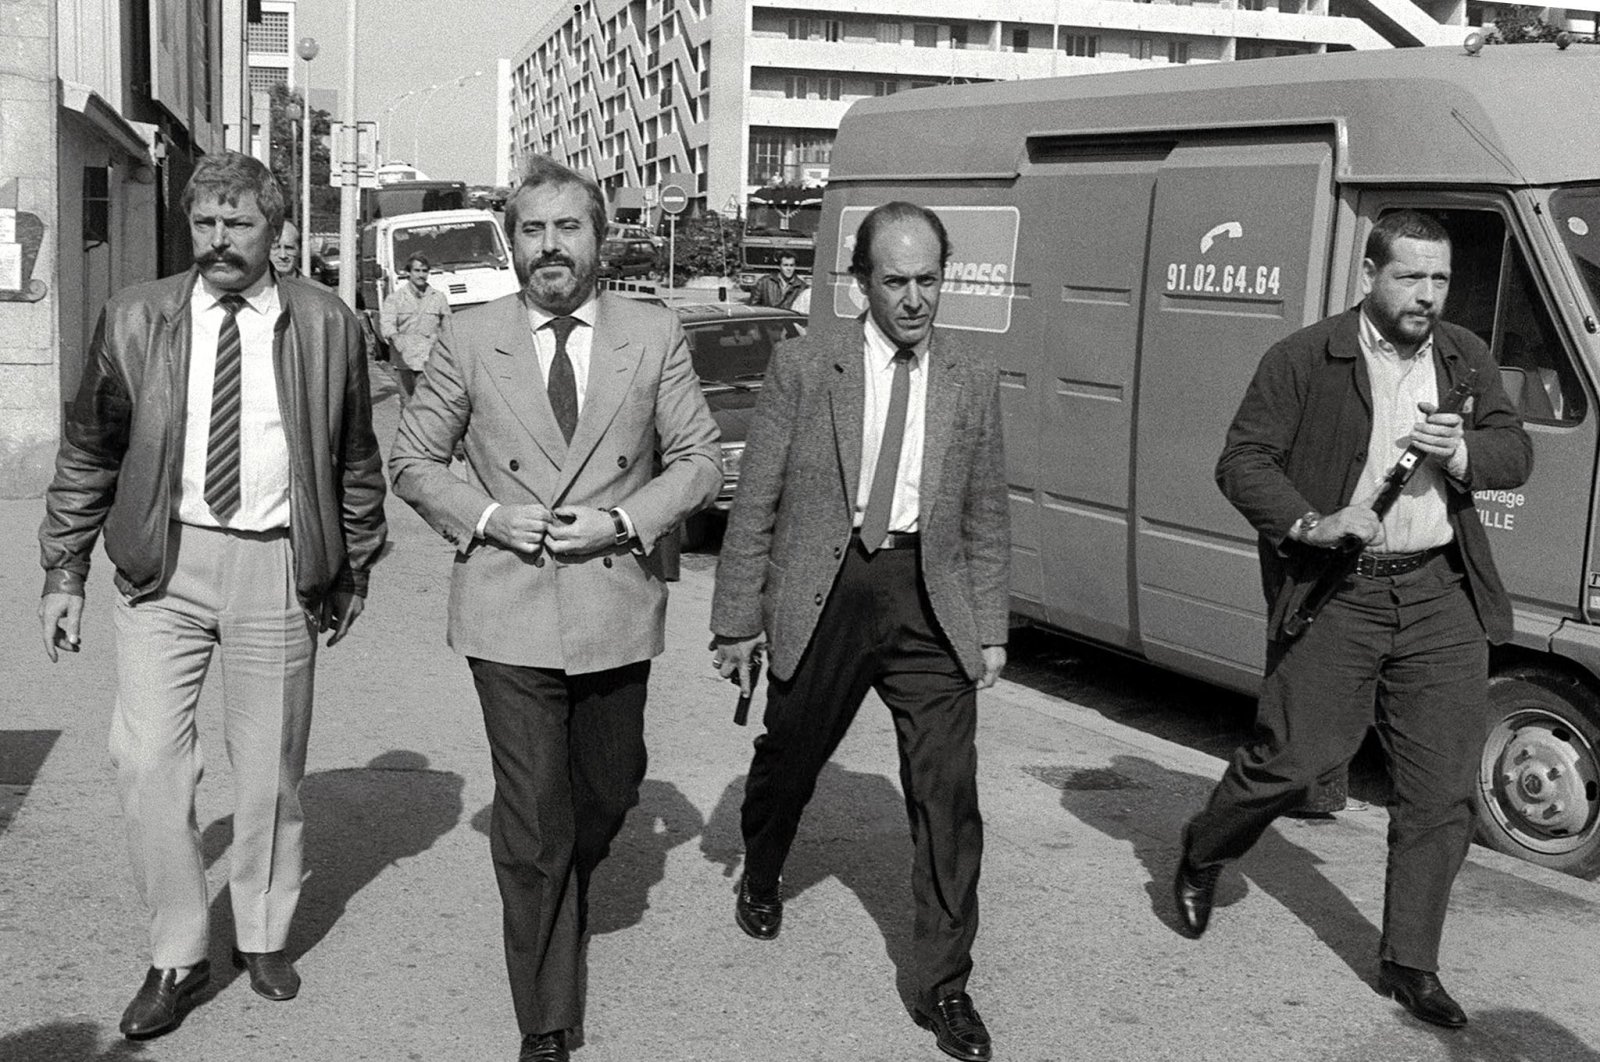 Italian Judge Giovanni Falcone (2-L), surrounded by his bodyguards, arrives in Marseille to meet his French counterparts to investigate the Mafia "Pizza Connection" criminal plot, Marseille, France, Oct. 21, 1986. (AFP File Photo)